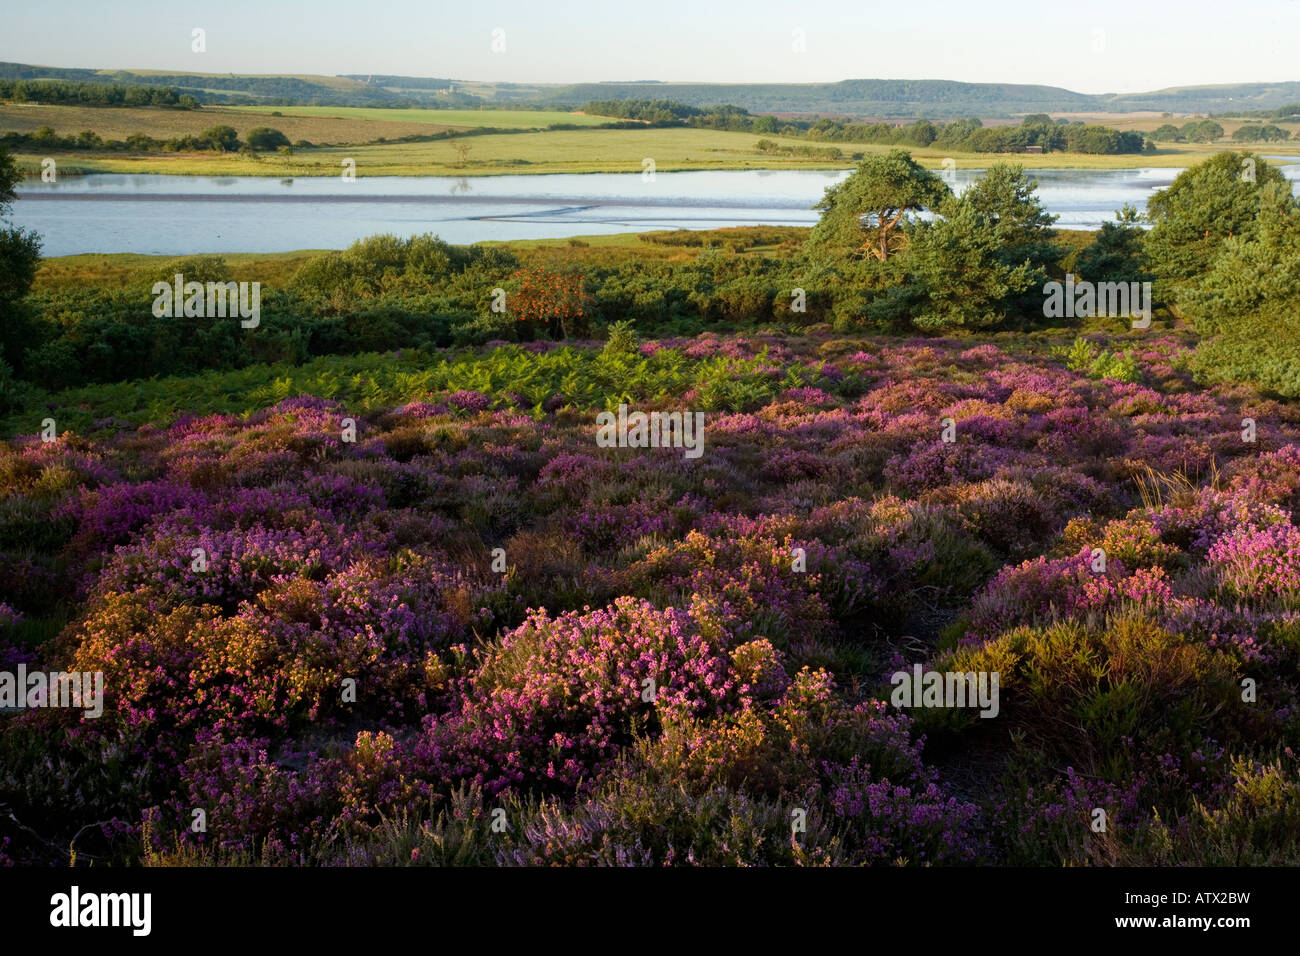 Heathland in full flower at Arne, Purbeck next to Poole Harbour, Dorset, England UK Stock Photo